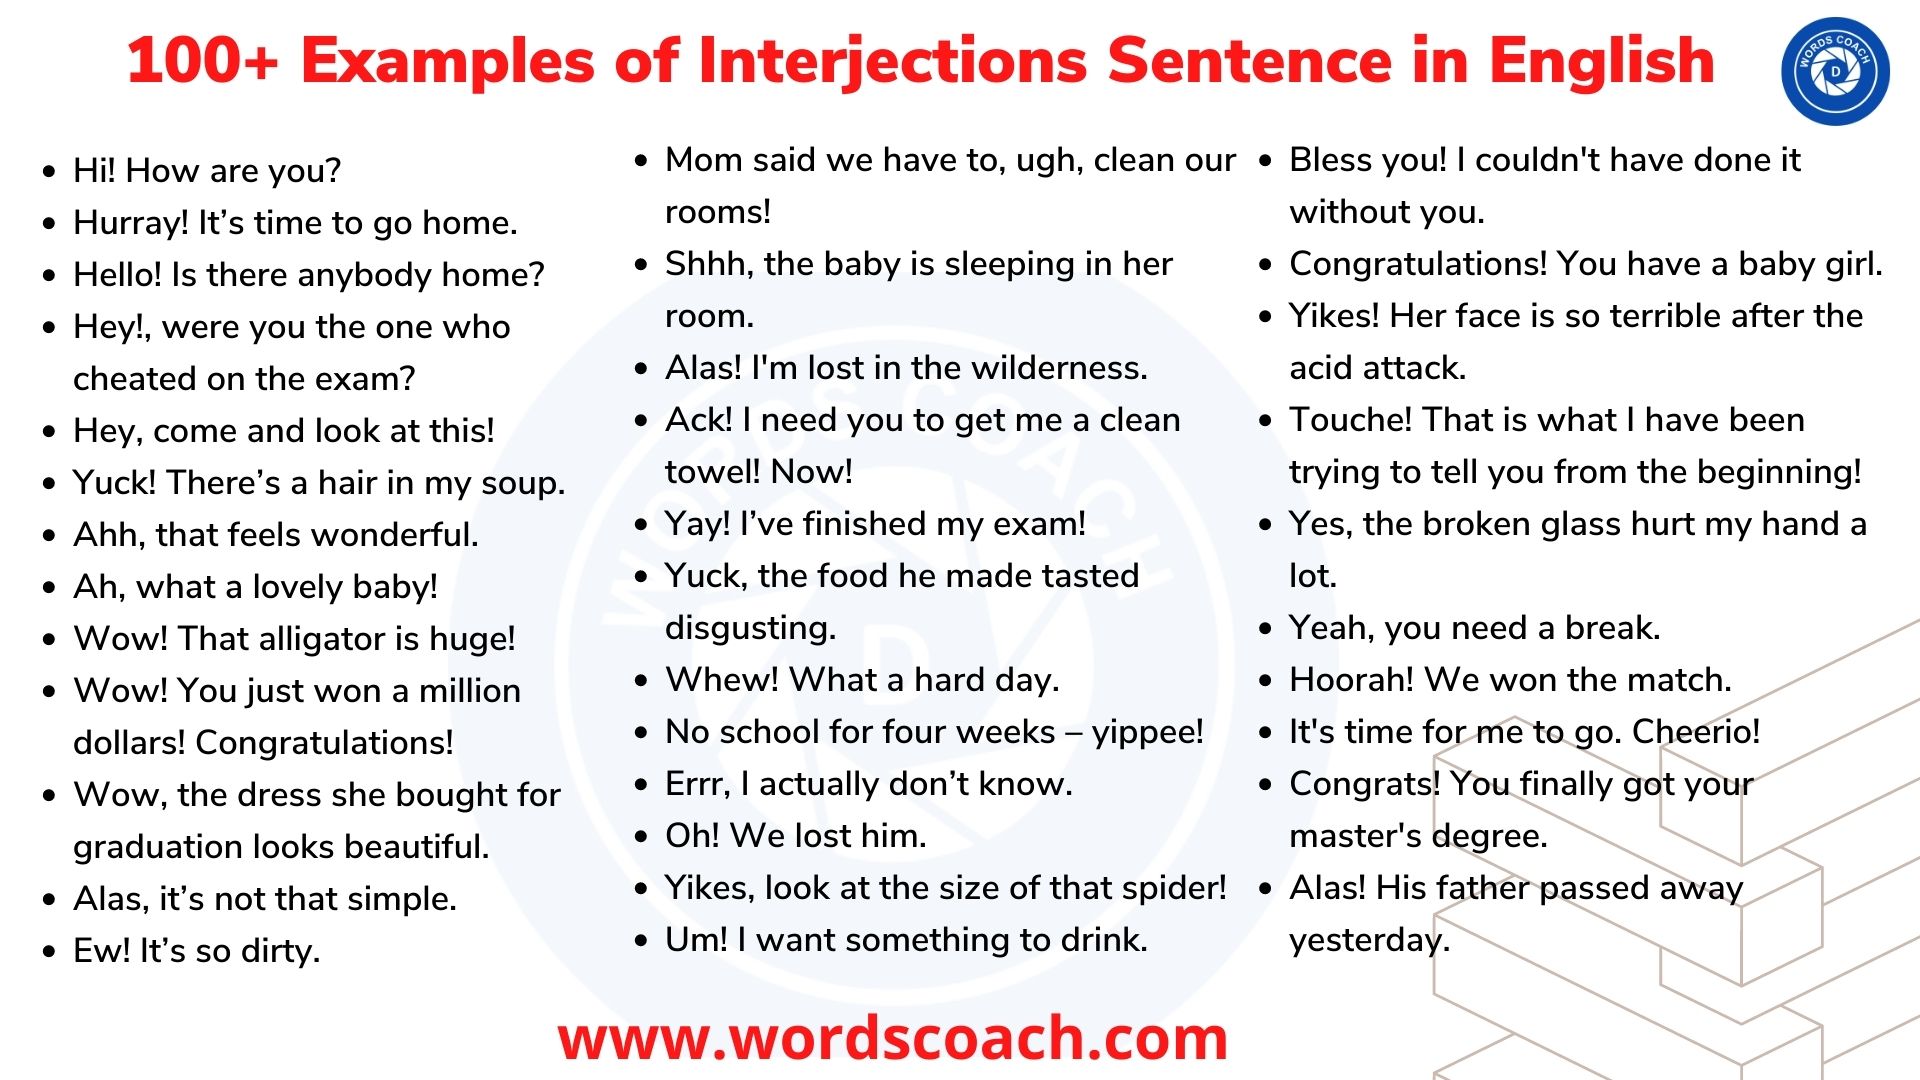 100+ Examples of Interjections Sentence in English - wordscoach.com